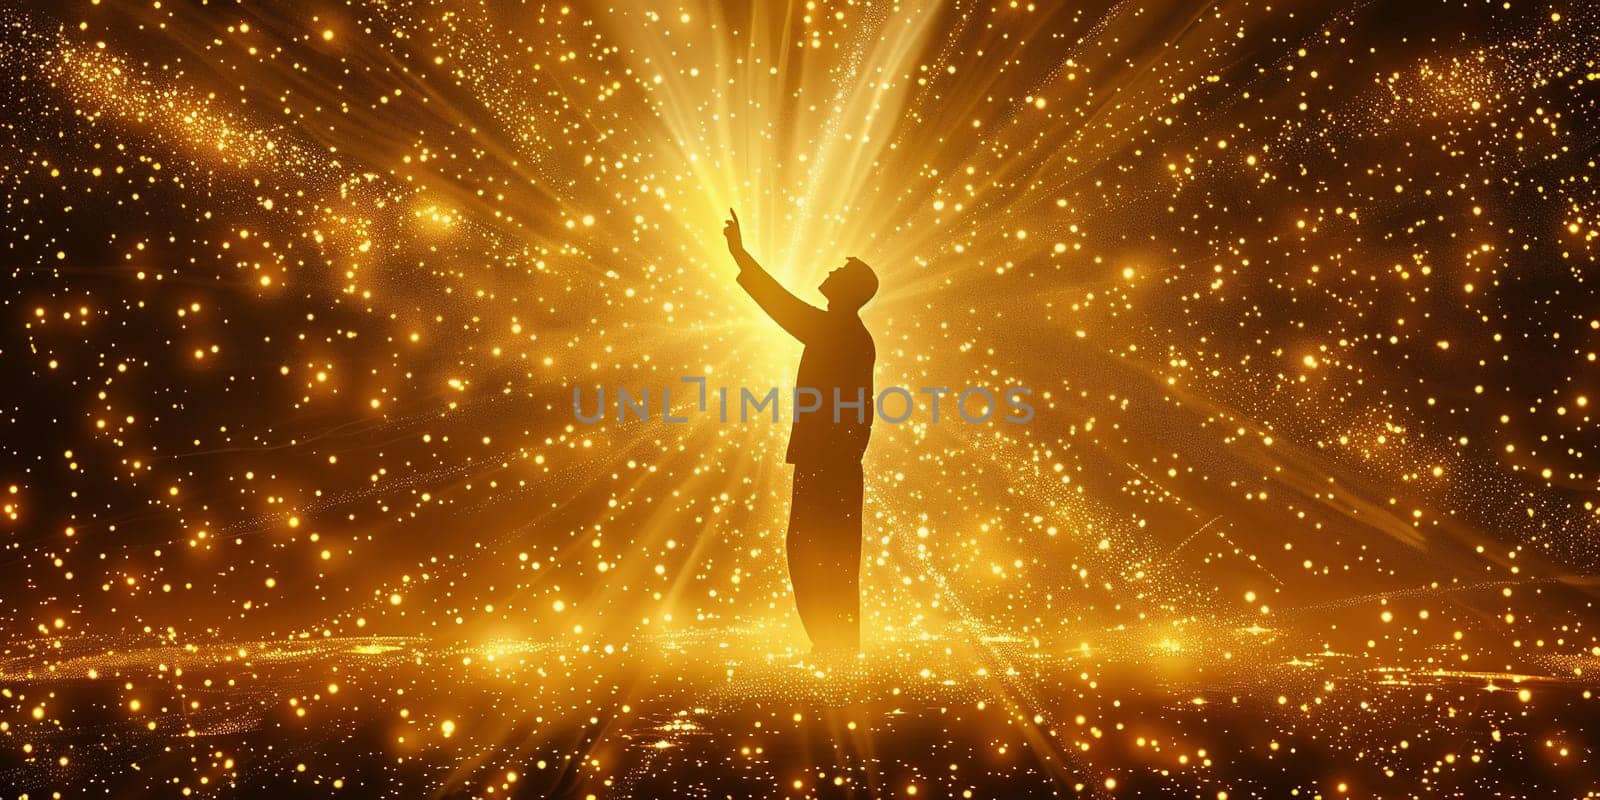 Man holding arms up in praise against a sunburst. High quality photo